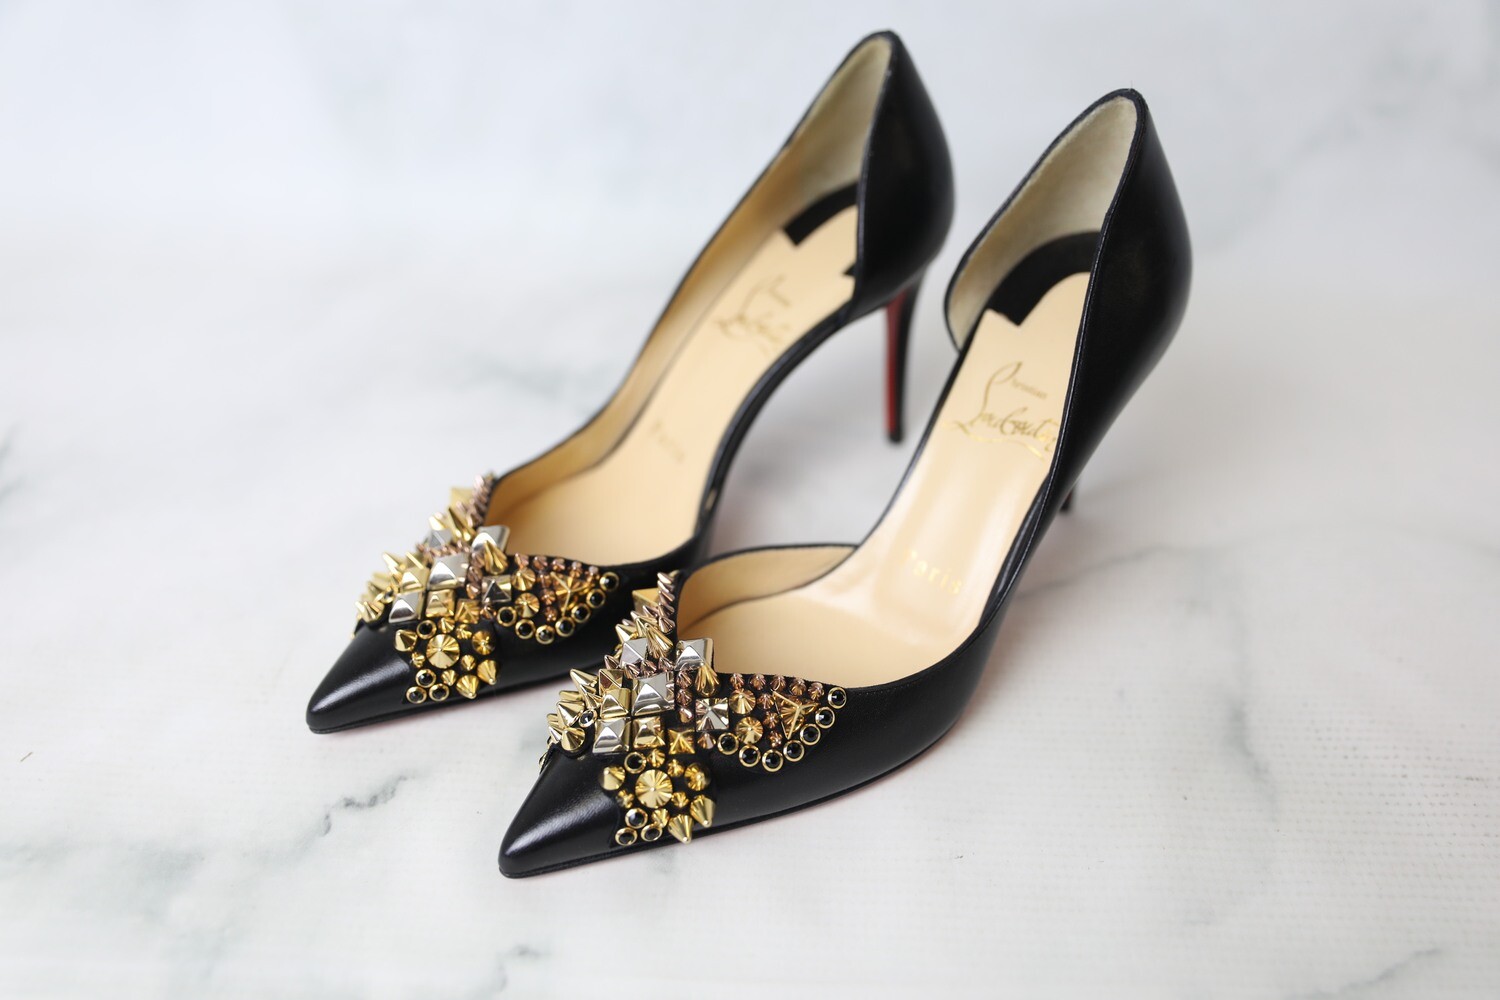 Let Elegance sprogfærdighed Christian Louboutin Shoes Heels Black Farfaclou D'orsay 85mm Nude Gold Spike  A279 Pumps, New in Box WA001